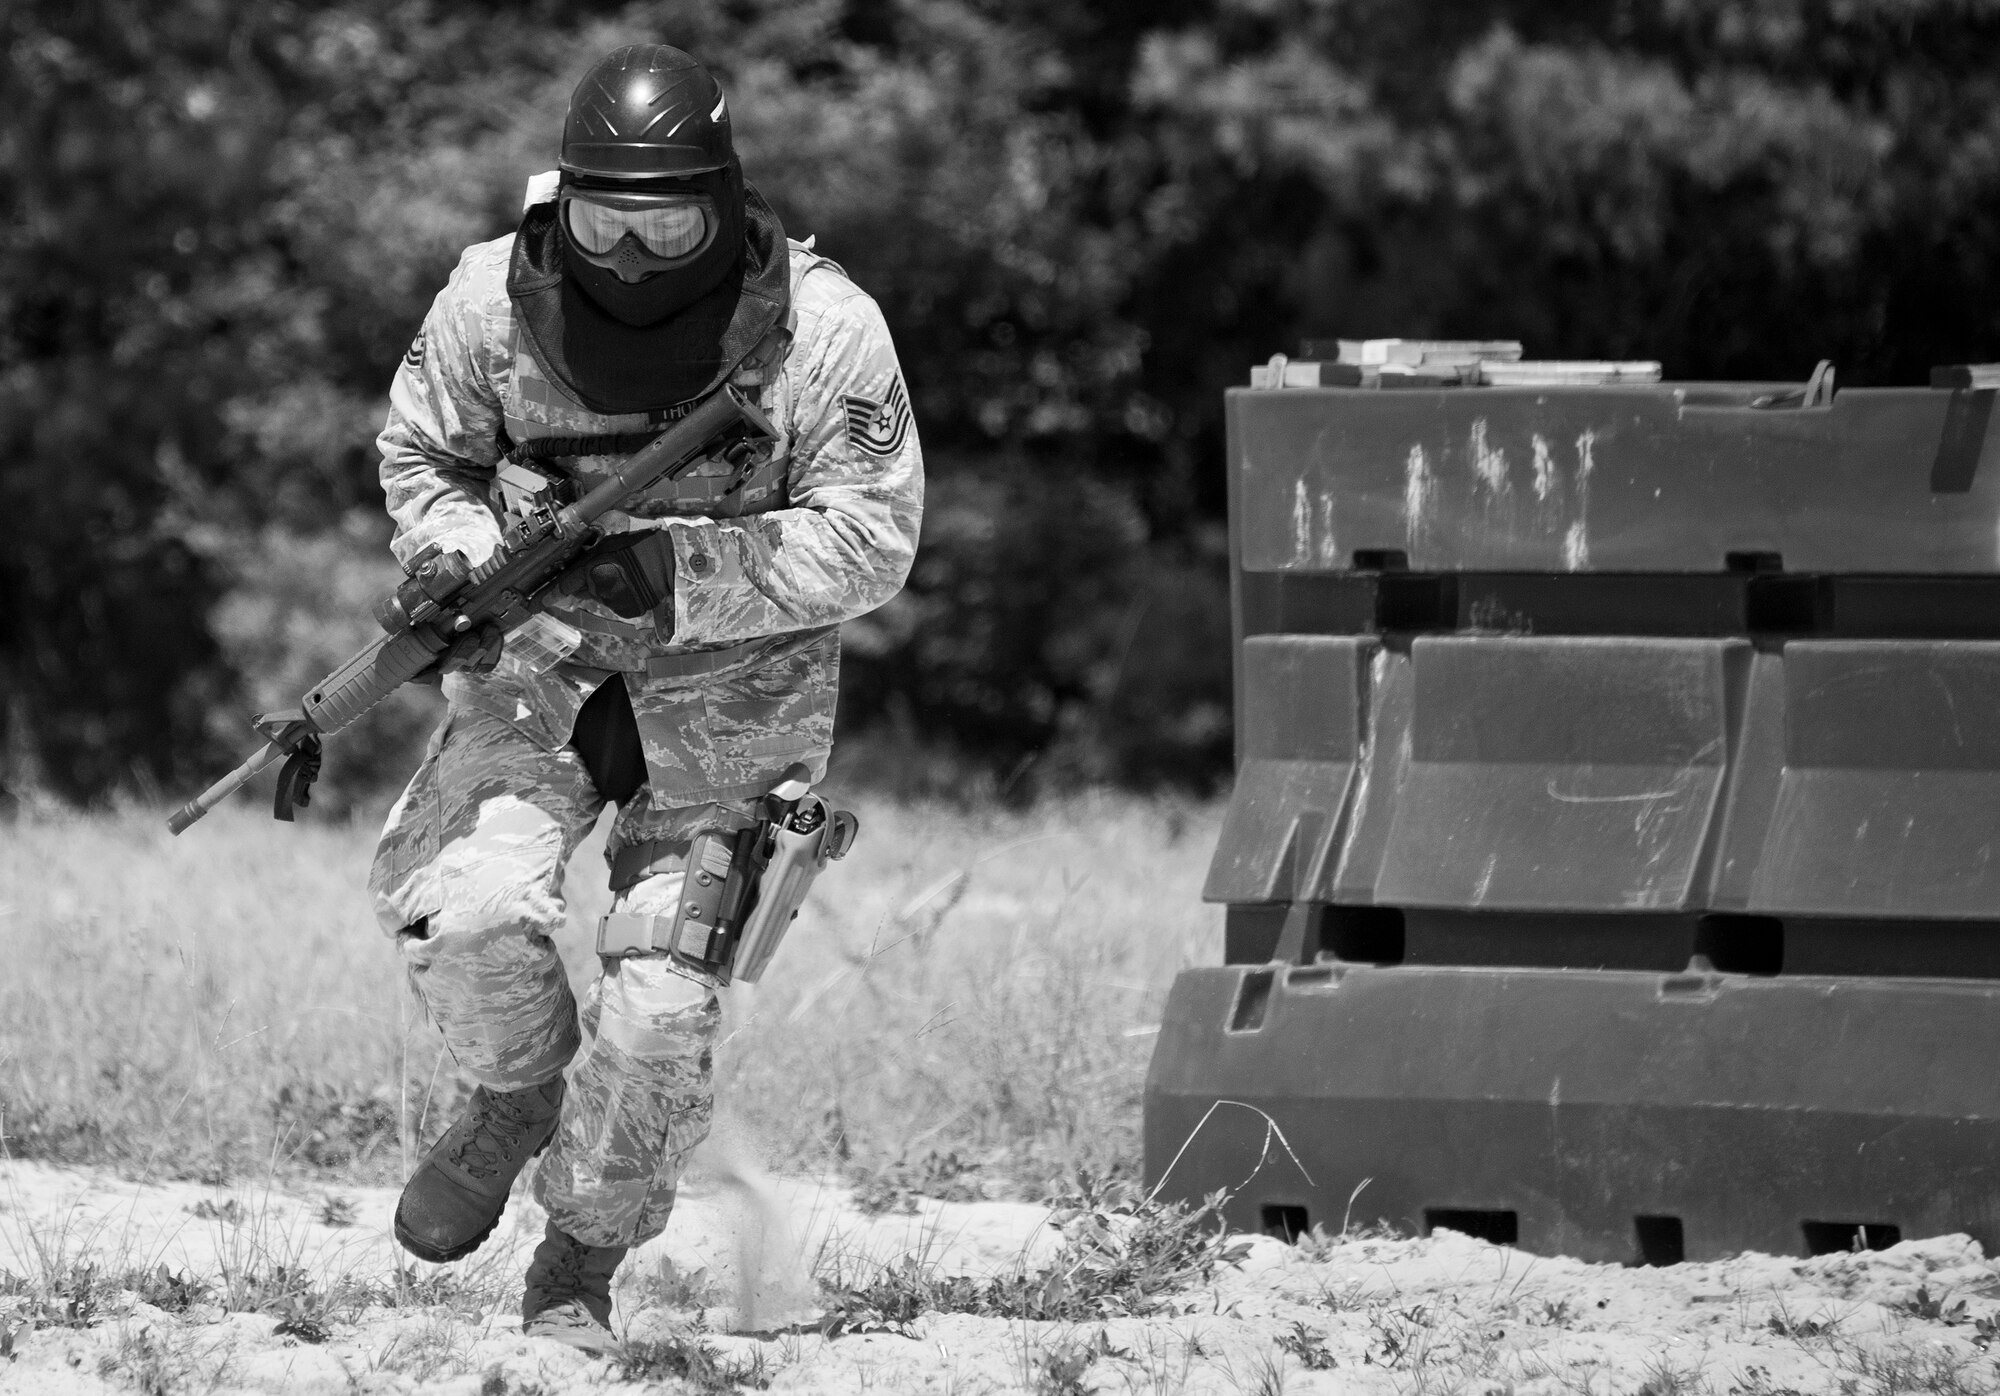 A 96th Security Forces Squadron Airman moves toward a barrier during a shoot, move and communicate drill at Eglin Air Force Base, Fla.  The mandatory training requirement is in addition to annual weapons qualification training.  The exercise consists of Airmen firing simmunition ammo while advancing toward, away from and to the side of a target.  This is followed by a building sweep and clear drill.  Eglin’s security forces personnel protect and defend the main base, facilities, gates, Duke Field, 7th SFG compound and land and water ranges.  (U.S. Air Force photo/Tech. Sgt. Sam King)